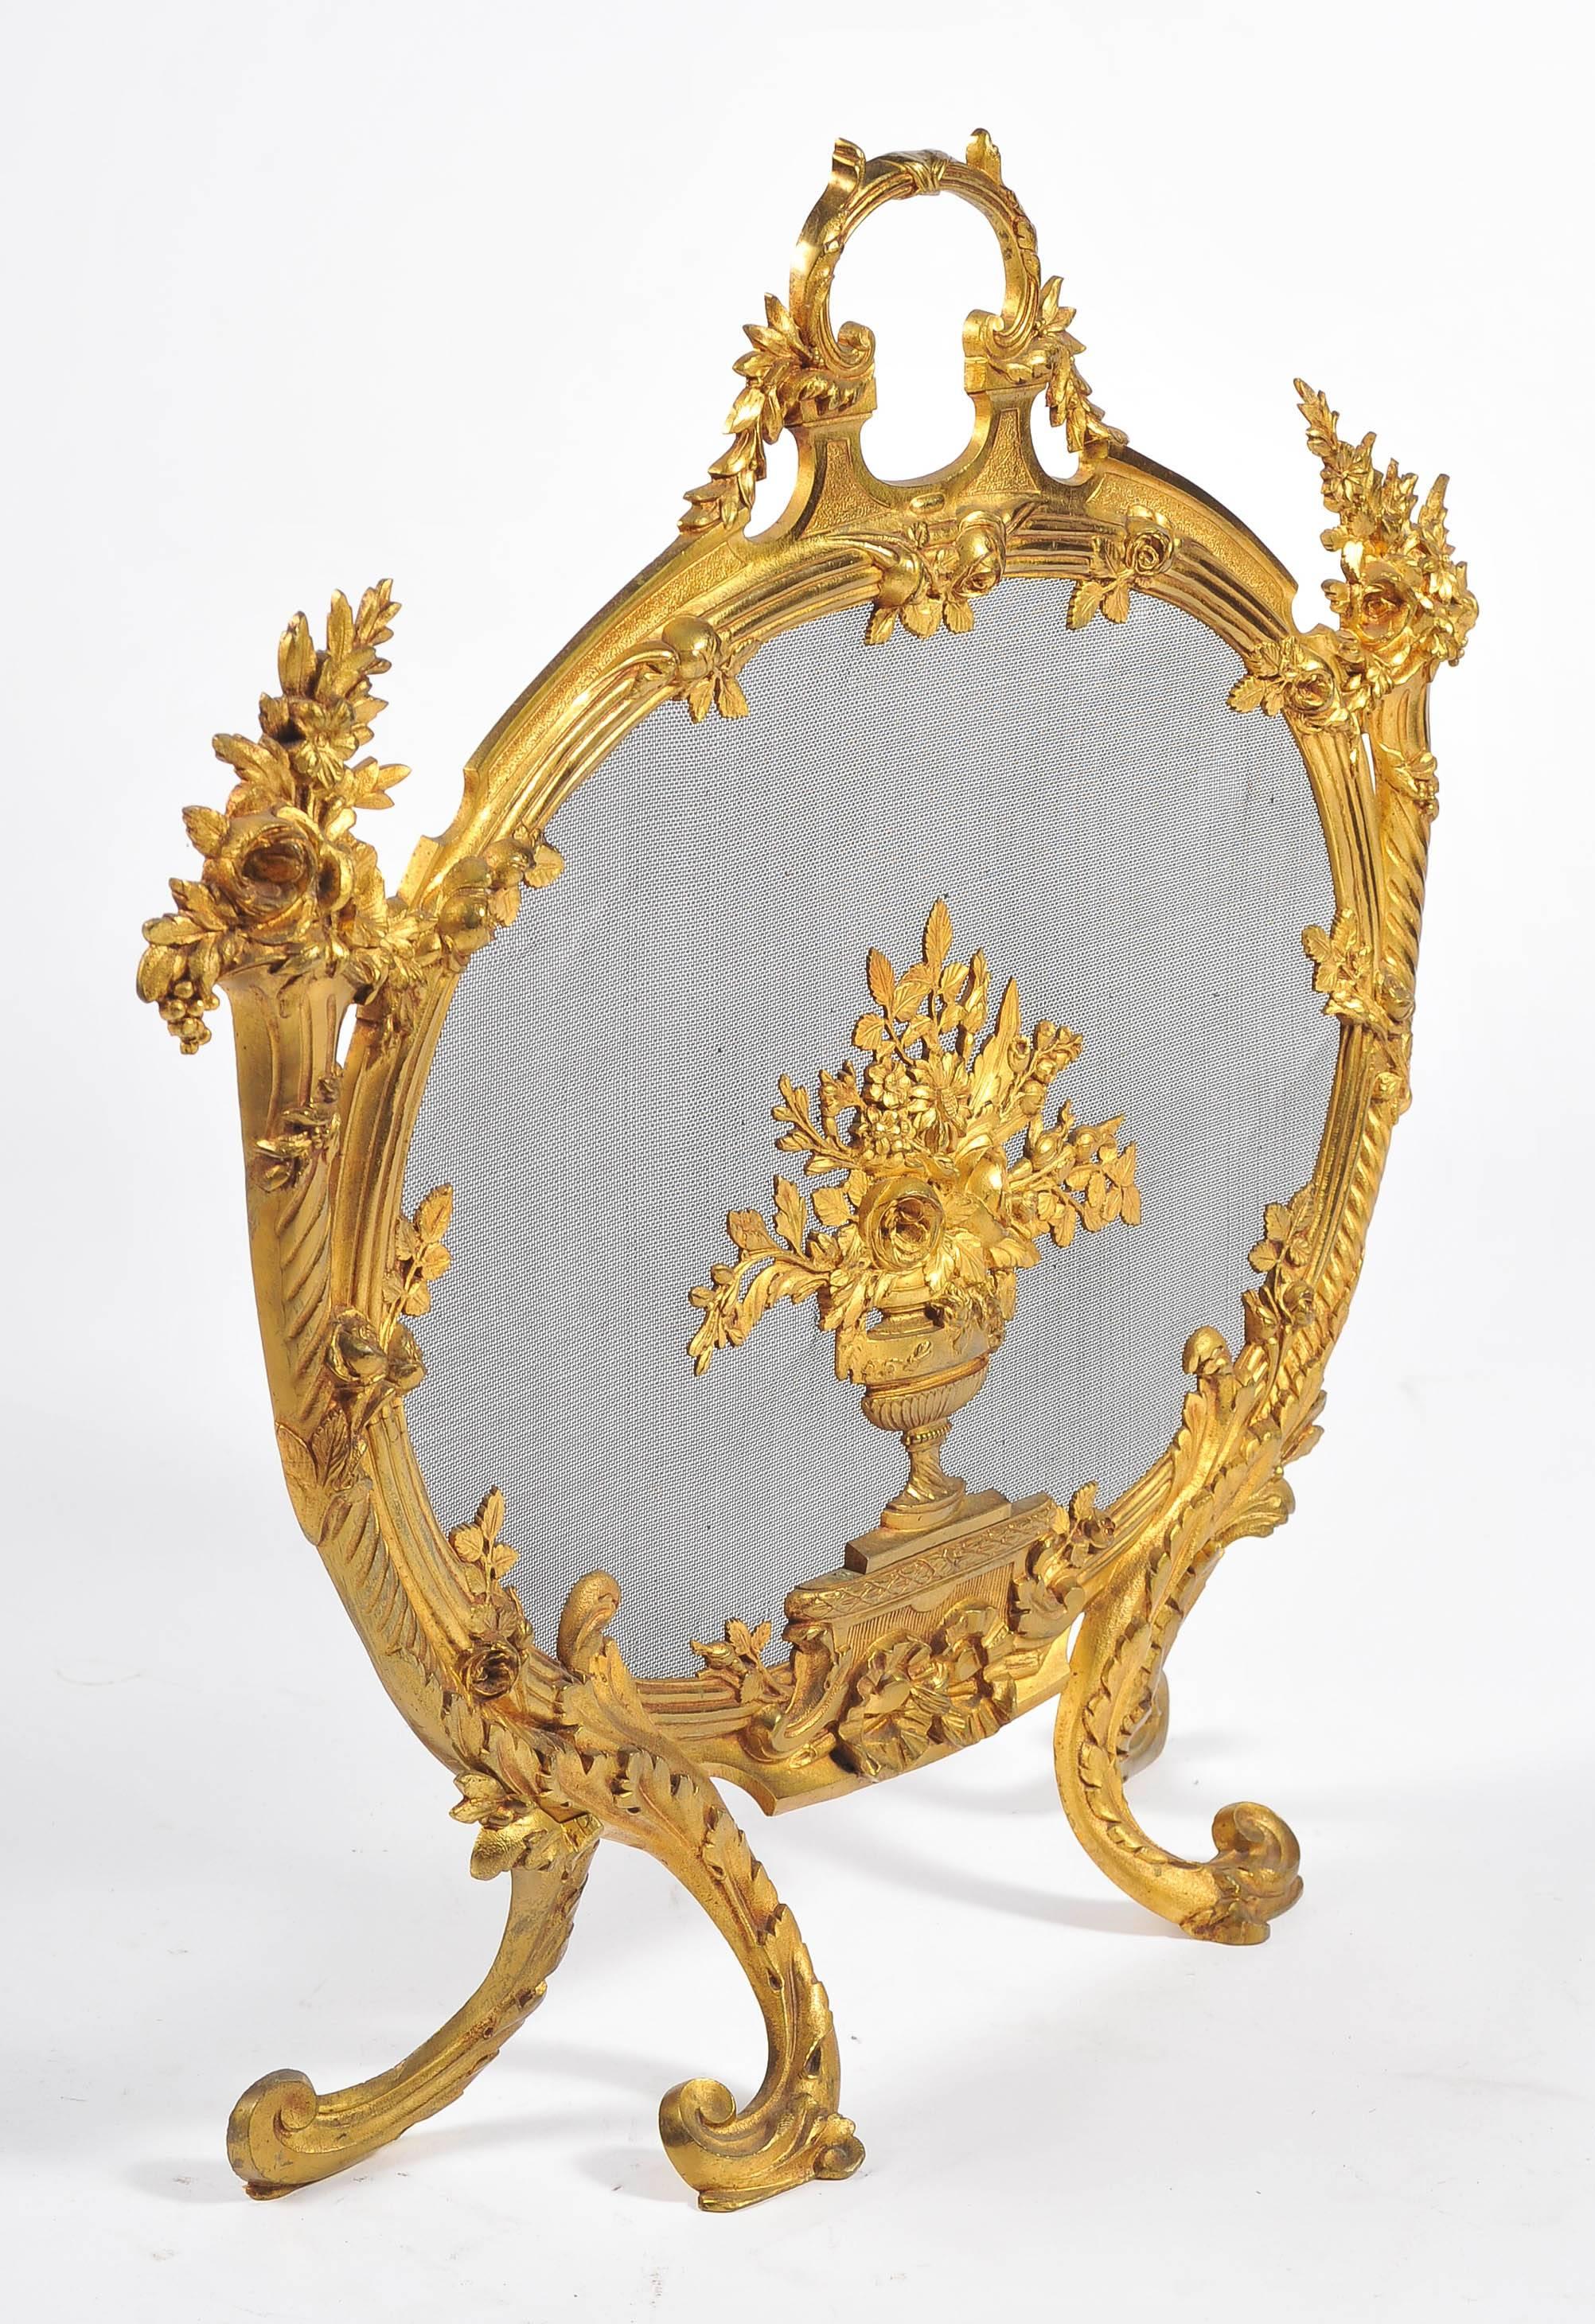 A very good quality 19th century French gilded ormolu Louis XV or Louis XVI style fire screen. Having wonderful cornucopia on either side with flowers, C scroll and foliate decoration framing a vase of flowers to the centre.